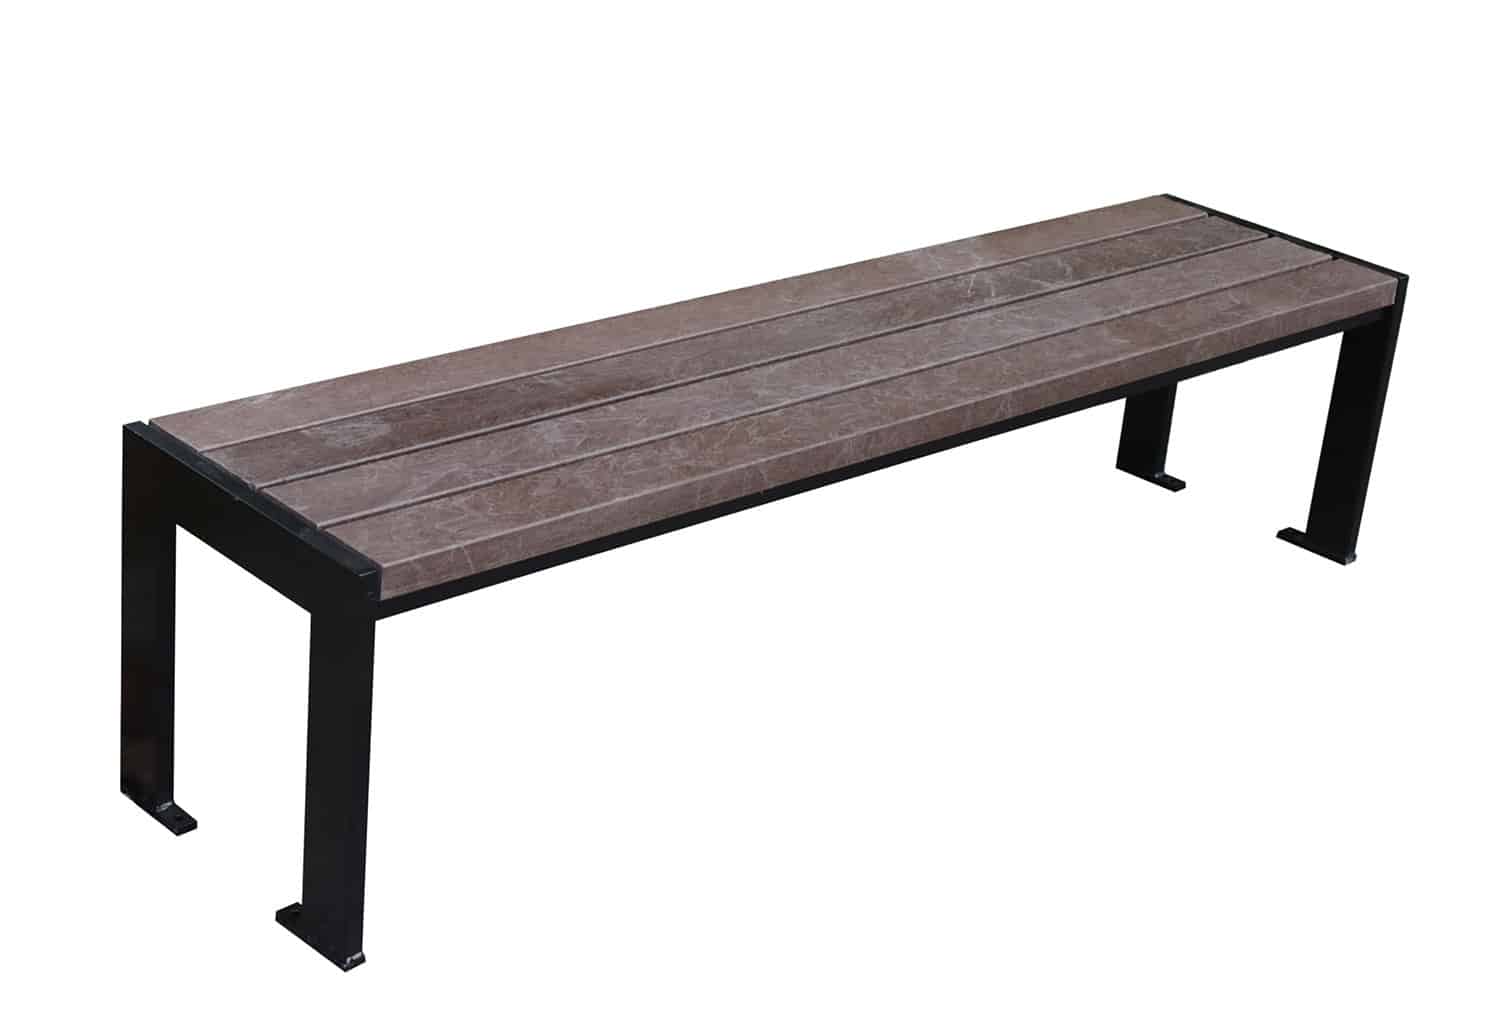 The Shibden backless steel and recycled plastic bench.